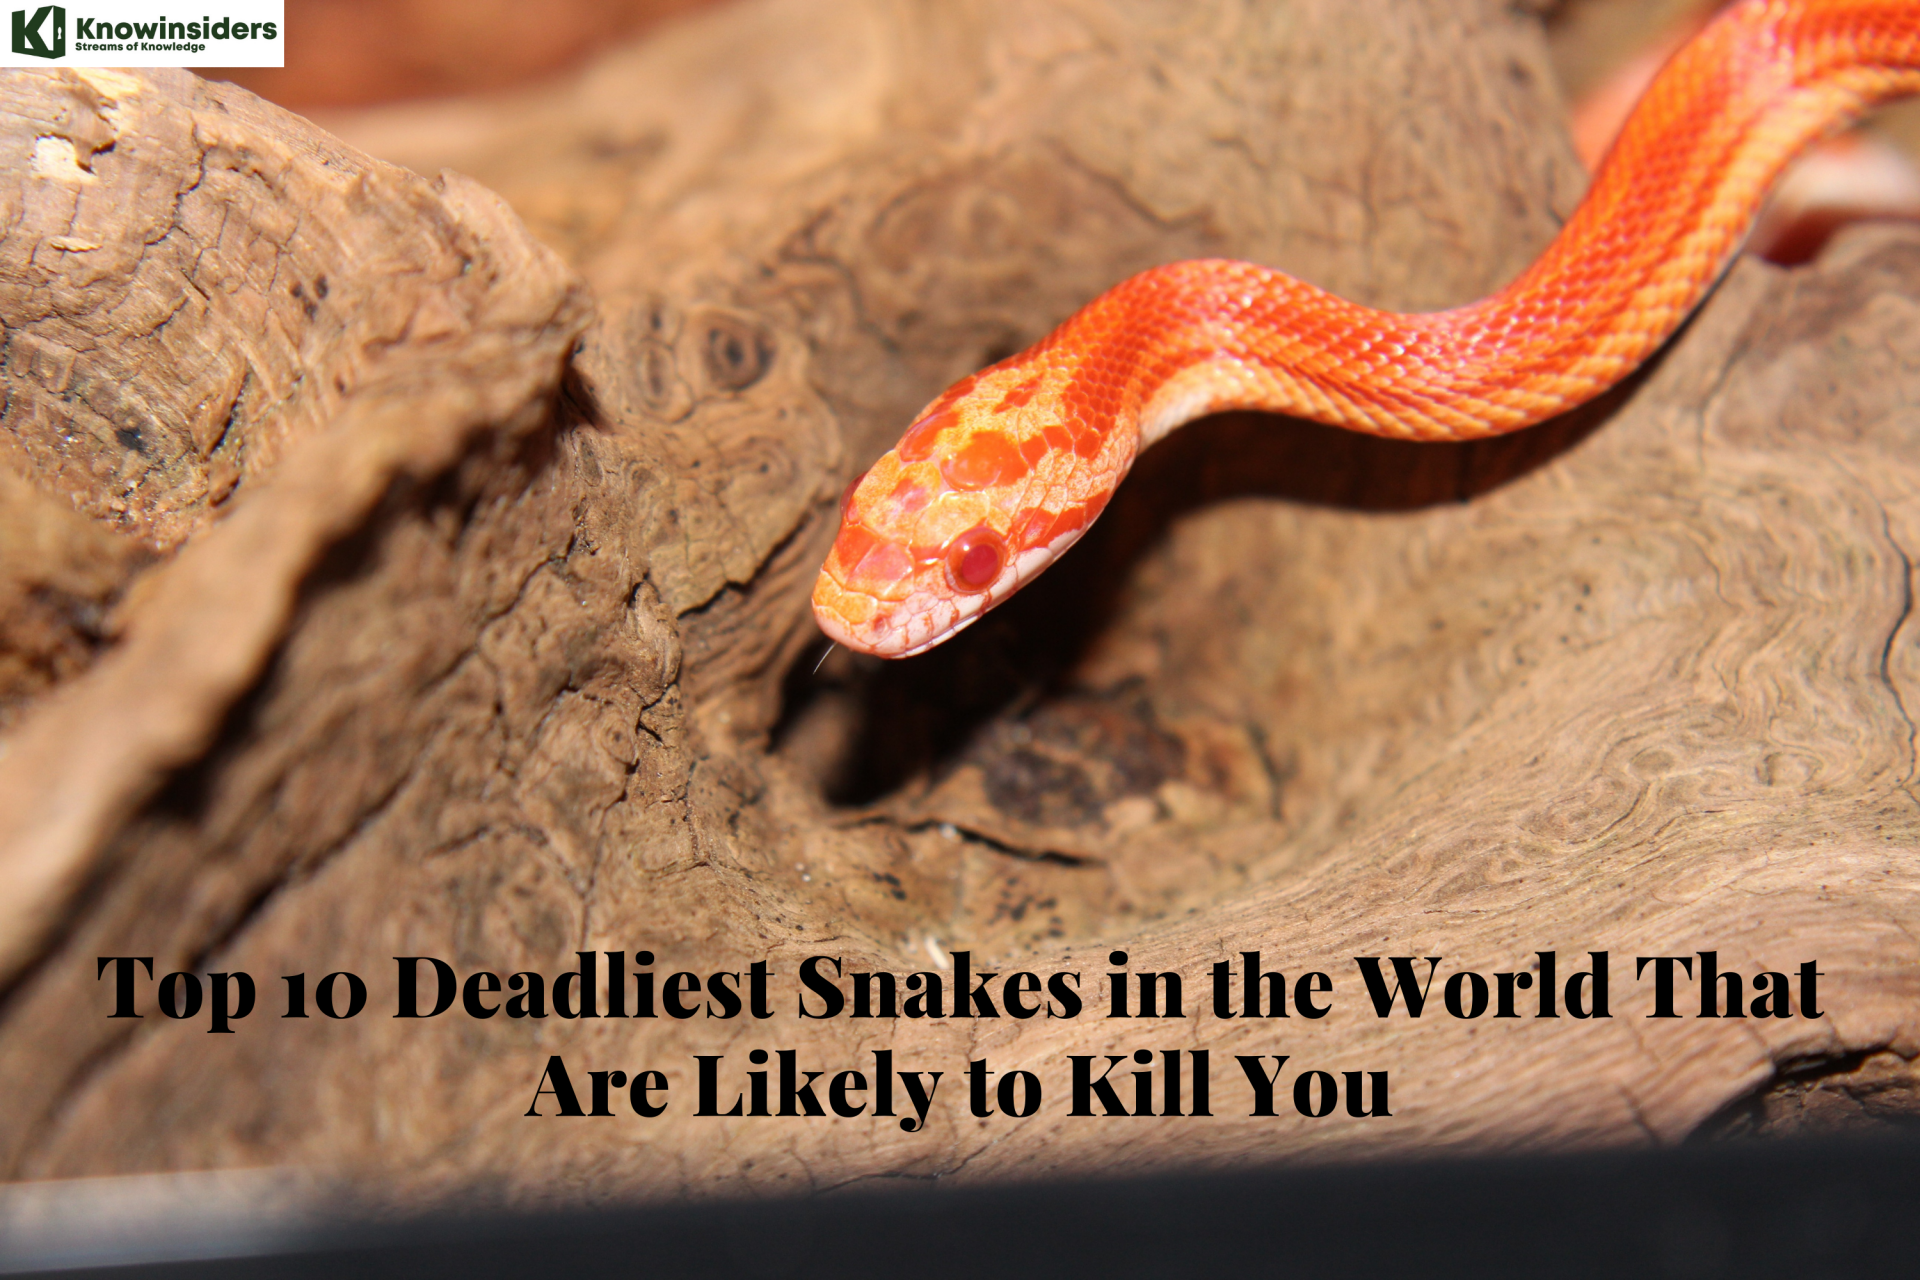 Top 10 Deadliest Snakes in the World That Are Likely to Kill You